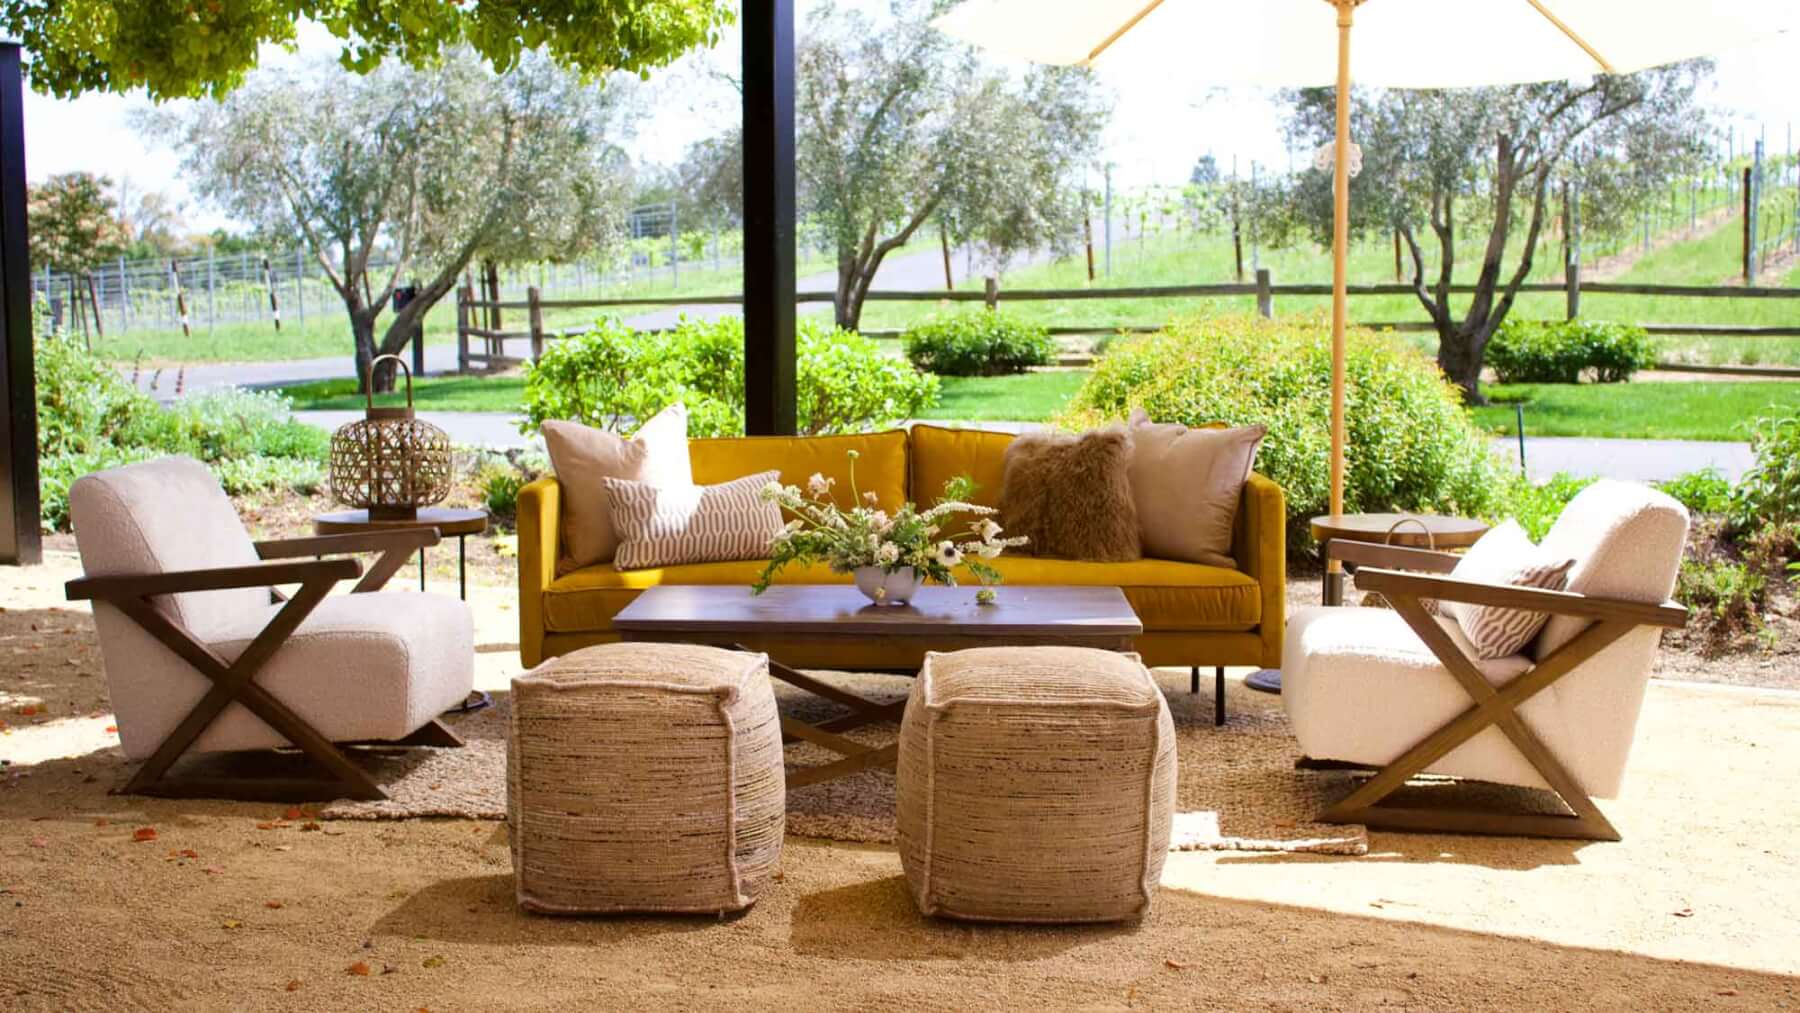 an outdoor winery event sitting area filled with furniture and a floral arrangement under an umbrella.